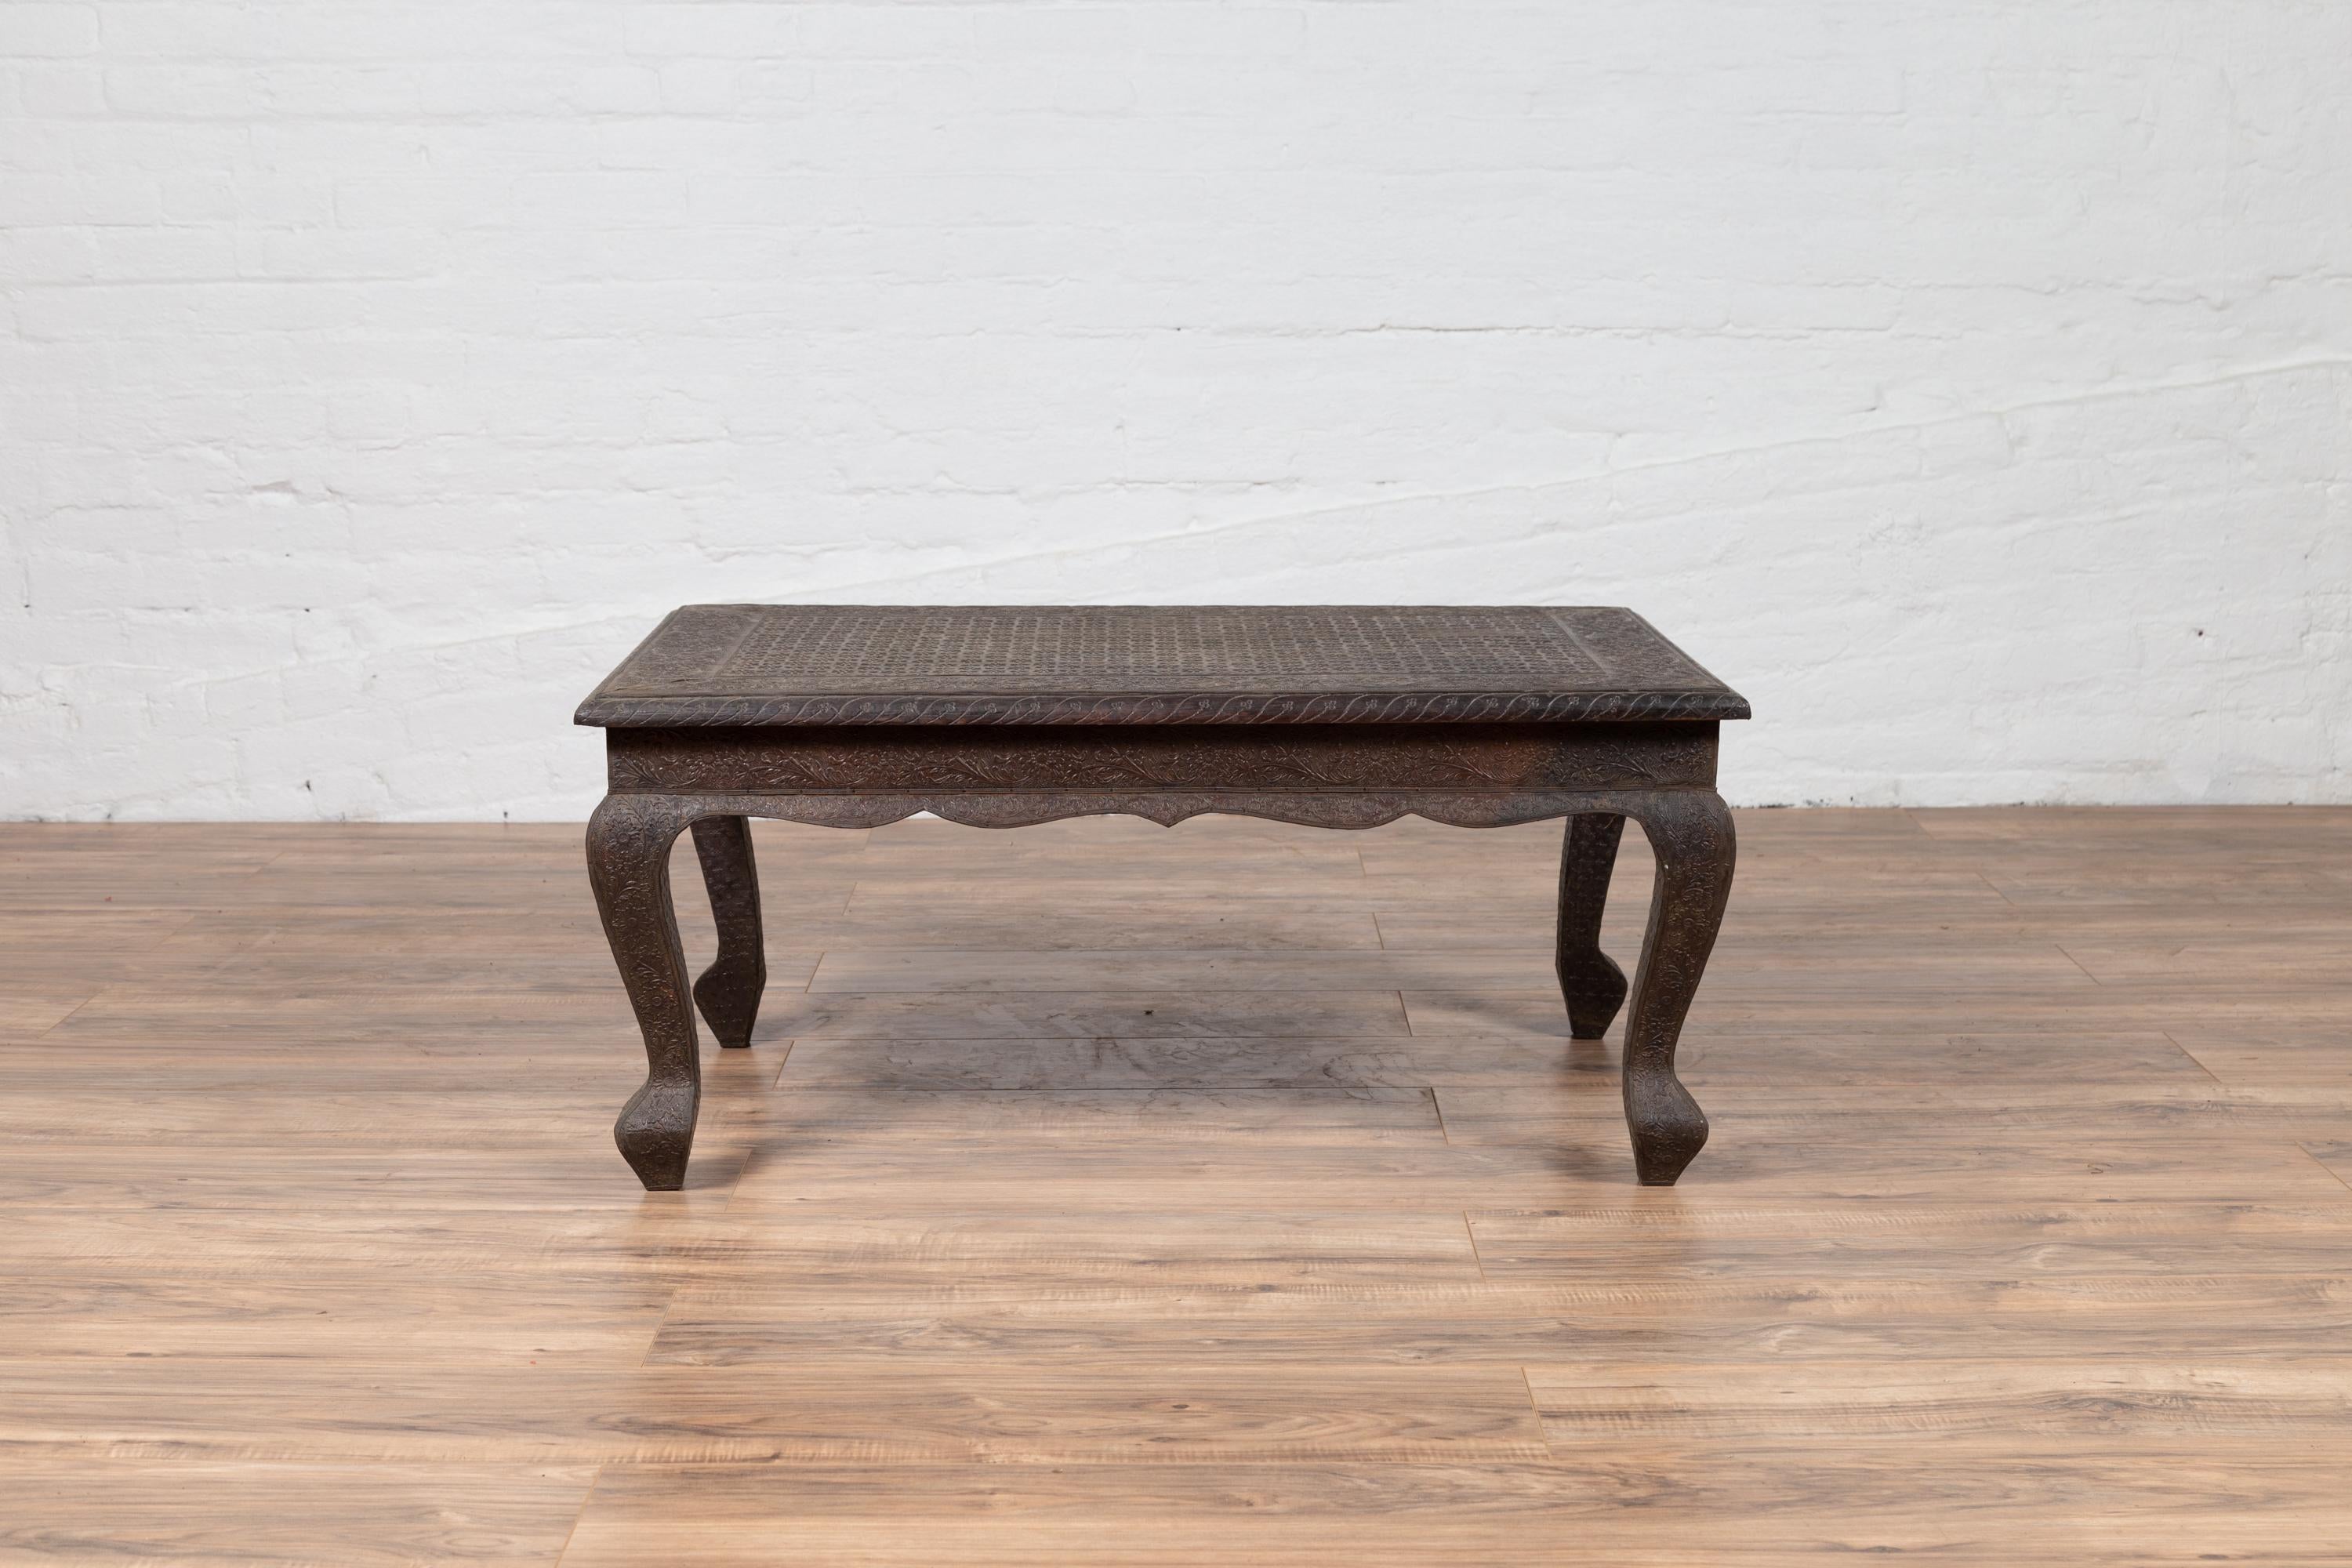 An Indian vintage coffee table from the mid-20th century, with handmade brushed metal patina over wood, hand-etched floral motifs and cabriole legs. This mid-20th-century Indian vintage coffee table is a striking example of craftsmanship and